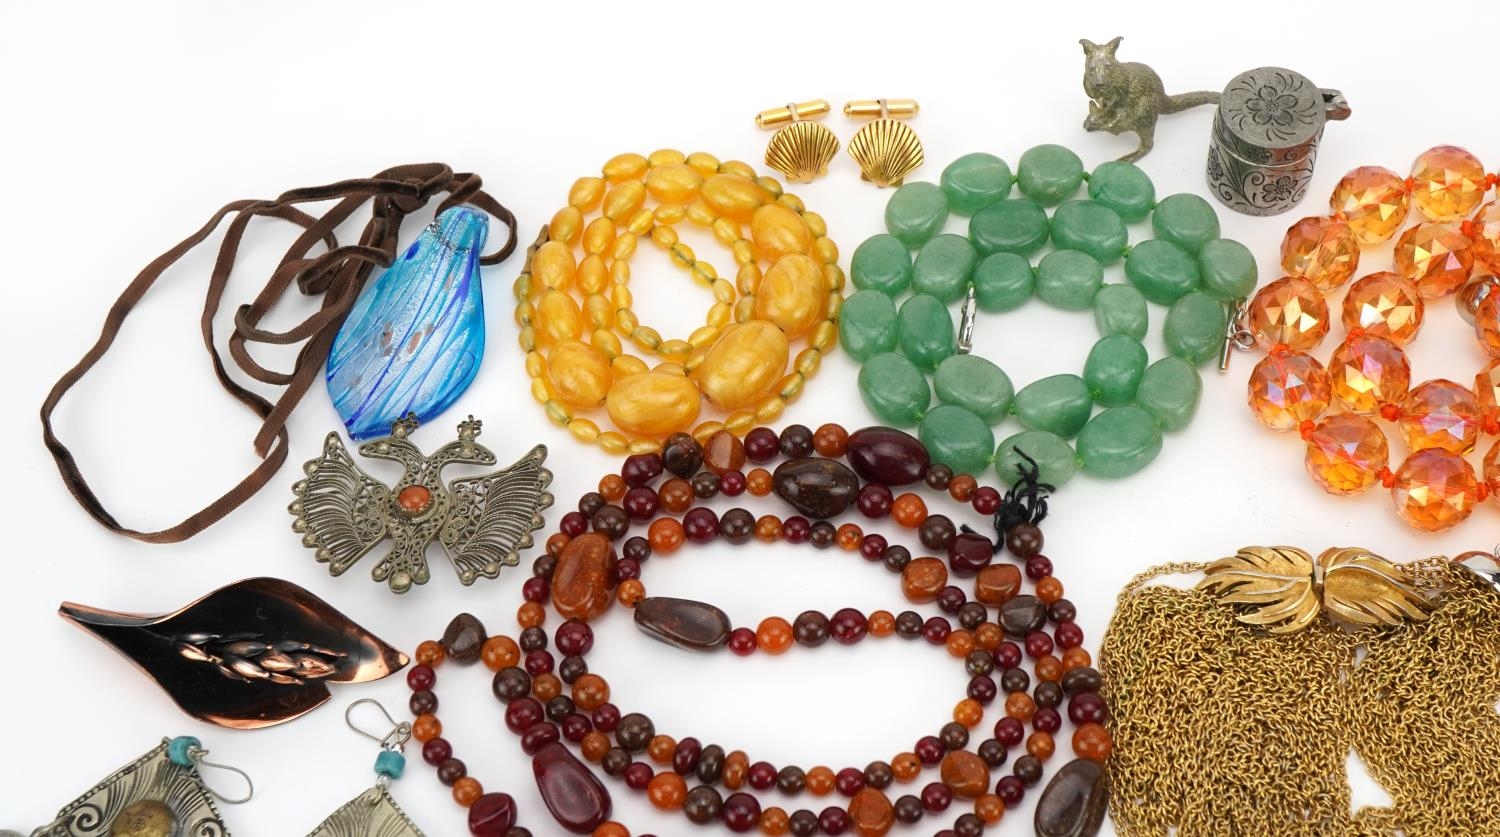 Vintage and later costume jewellery including a Trifari necklace, amber coloured bead necklaces, - Image 2 of 5